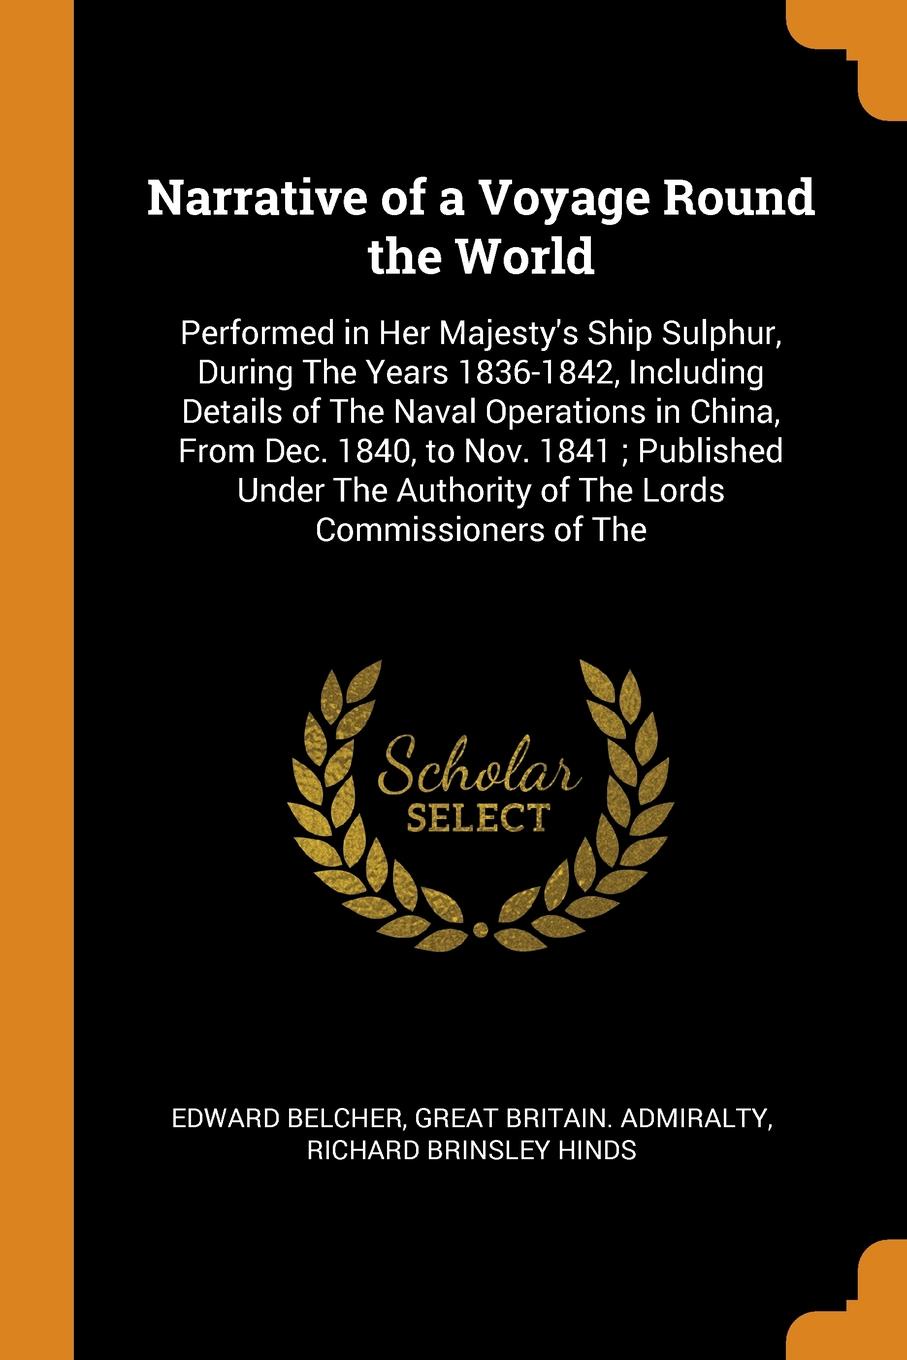 Narrative of a Voyage Round the World. Performed in Her Majesty`s Ship Sulphur, During The Years 1836-1842, Including Details of The Naval Operations in China, From Dec. 1840, to Nov. 1841 ; Published Under The Authority of The Lords Commissioners...